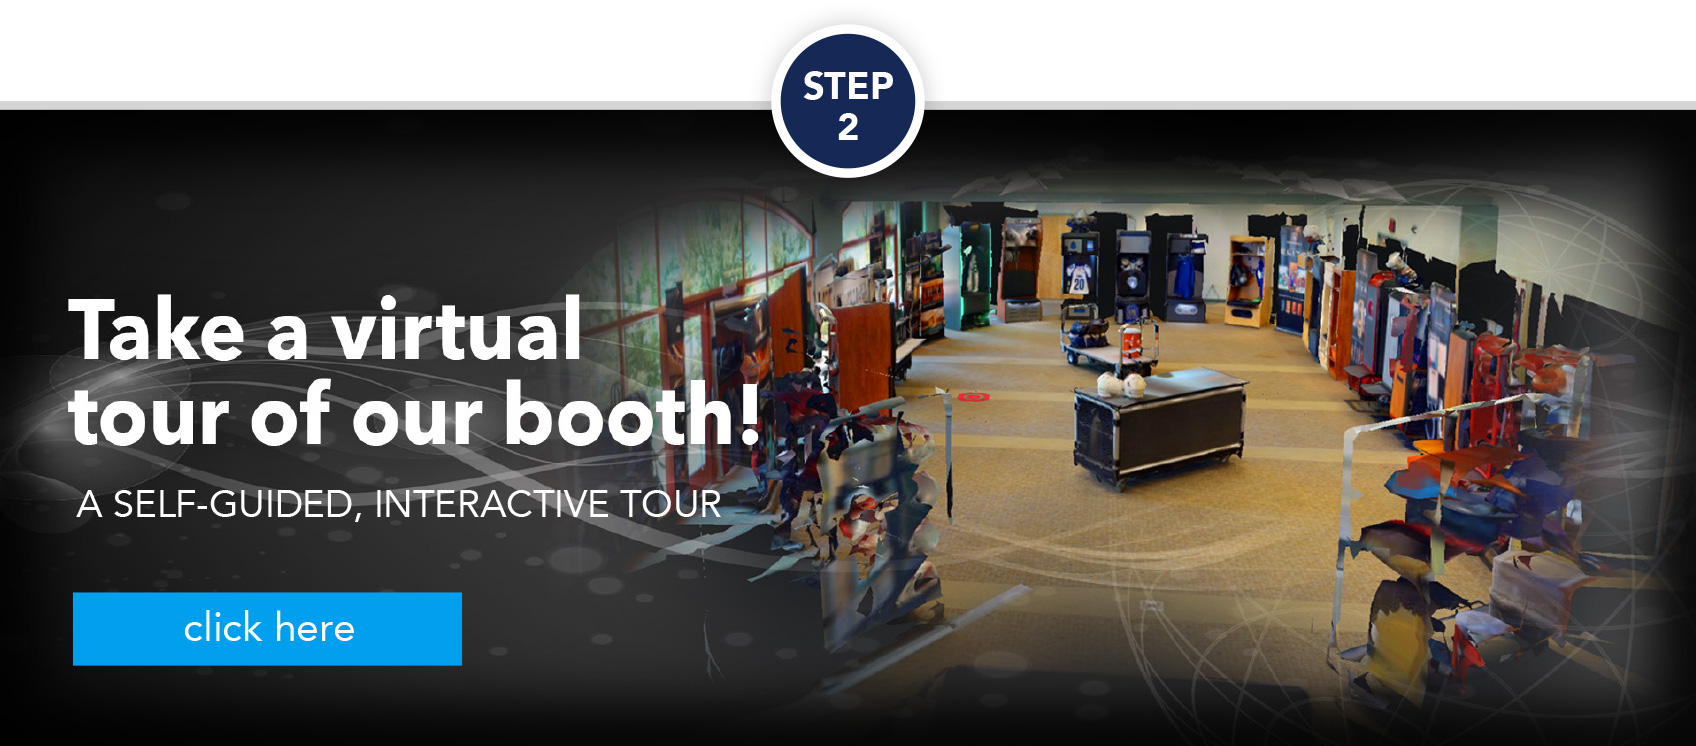 Step 2: Take a virtual tour of our booth